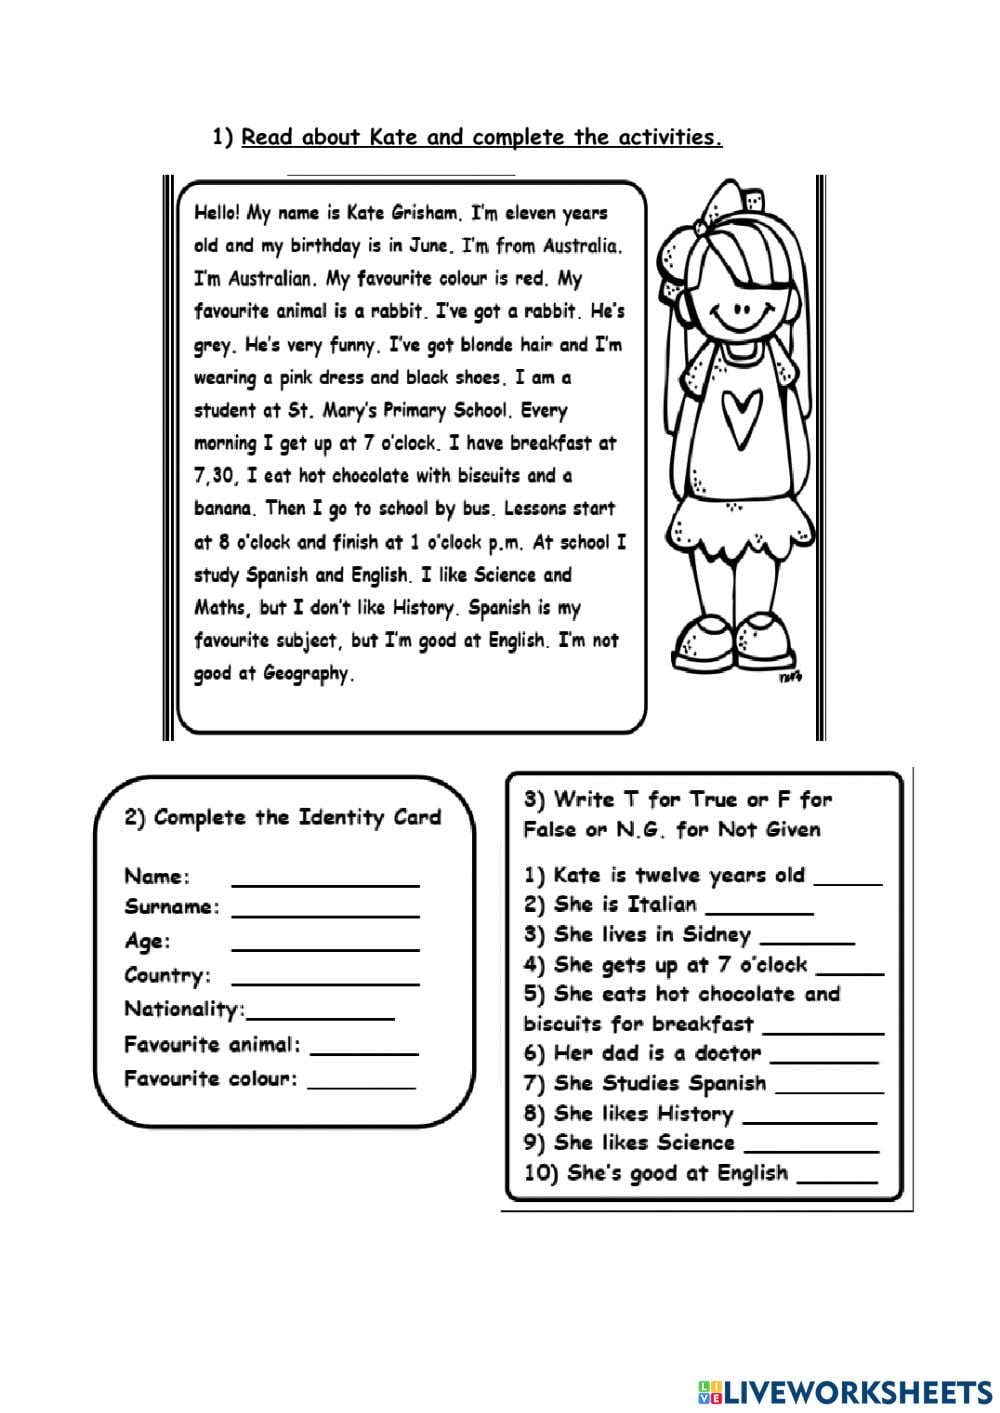 Reading Comprehension Online Exercise For 4th Grade